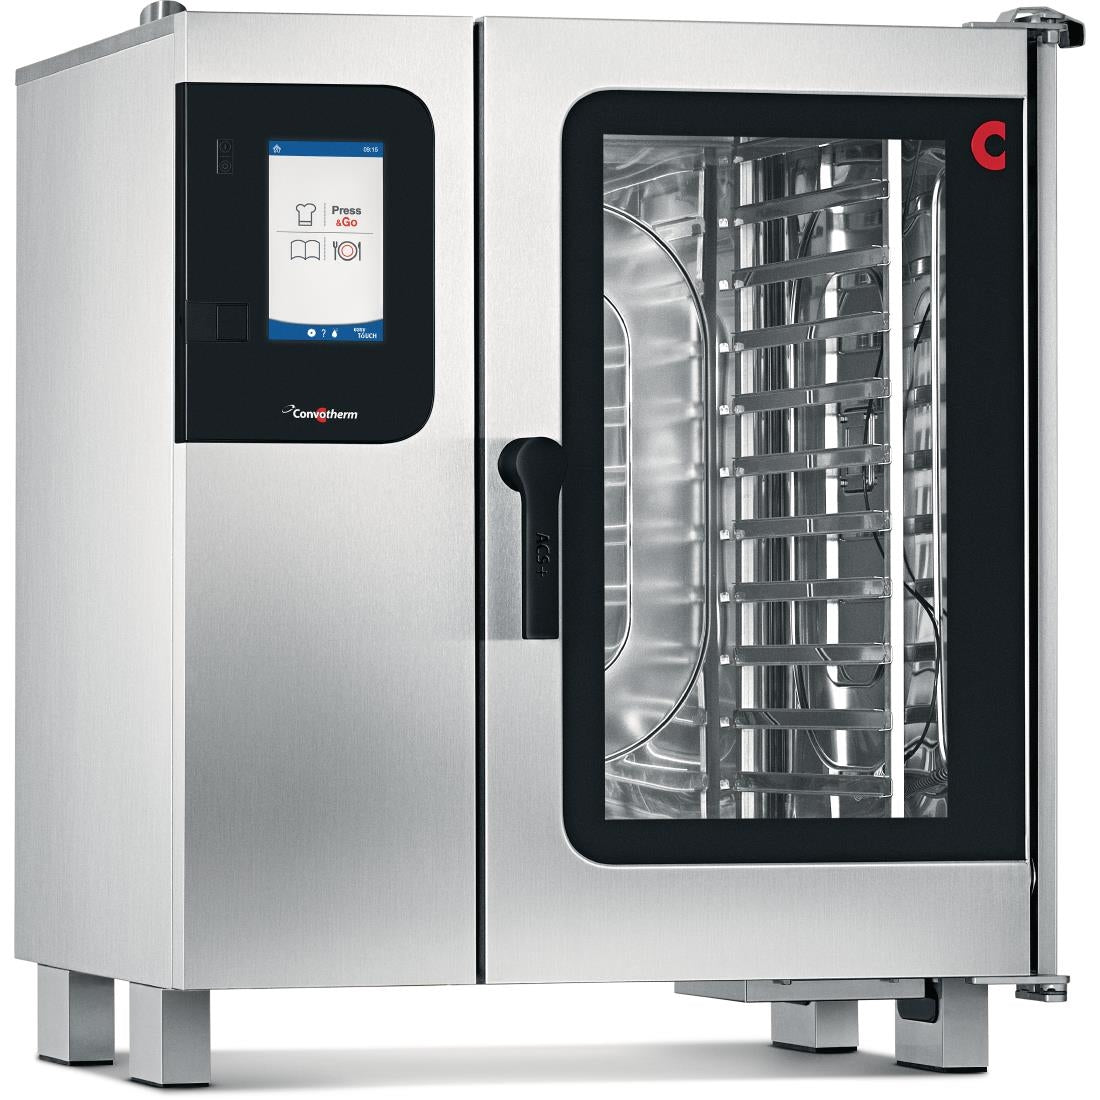 HC256-MO Convotherm 4 easyTouch Combi Oven 10 x 1 x1 GN Grid JD Catering Equipment Solutions Ltd